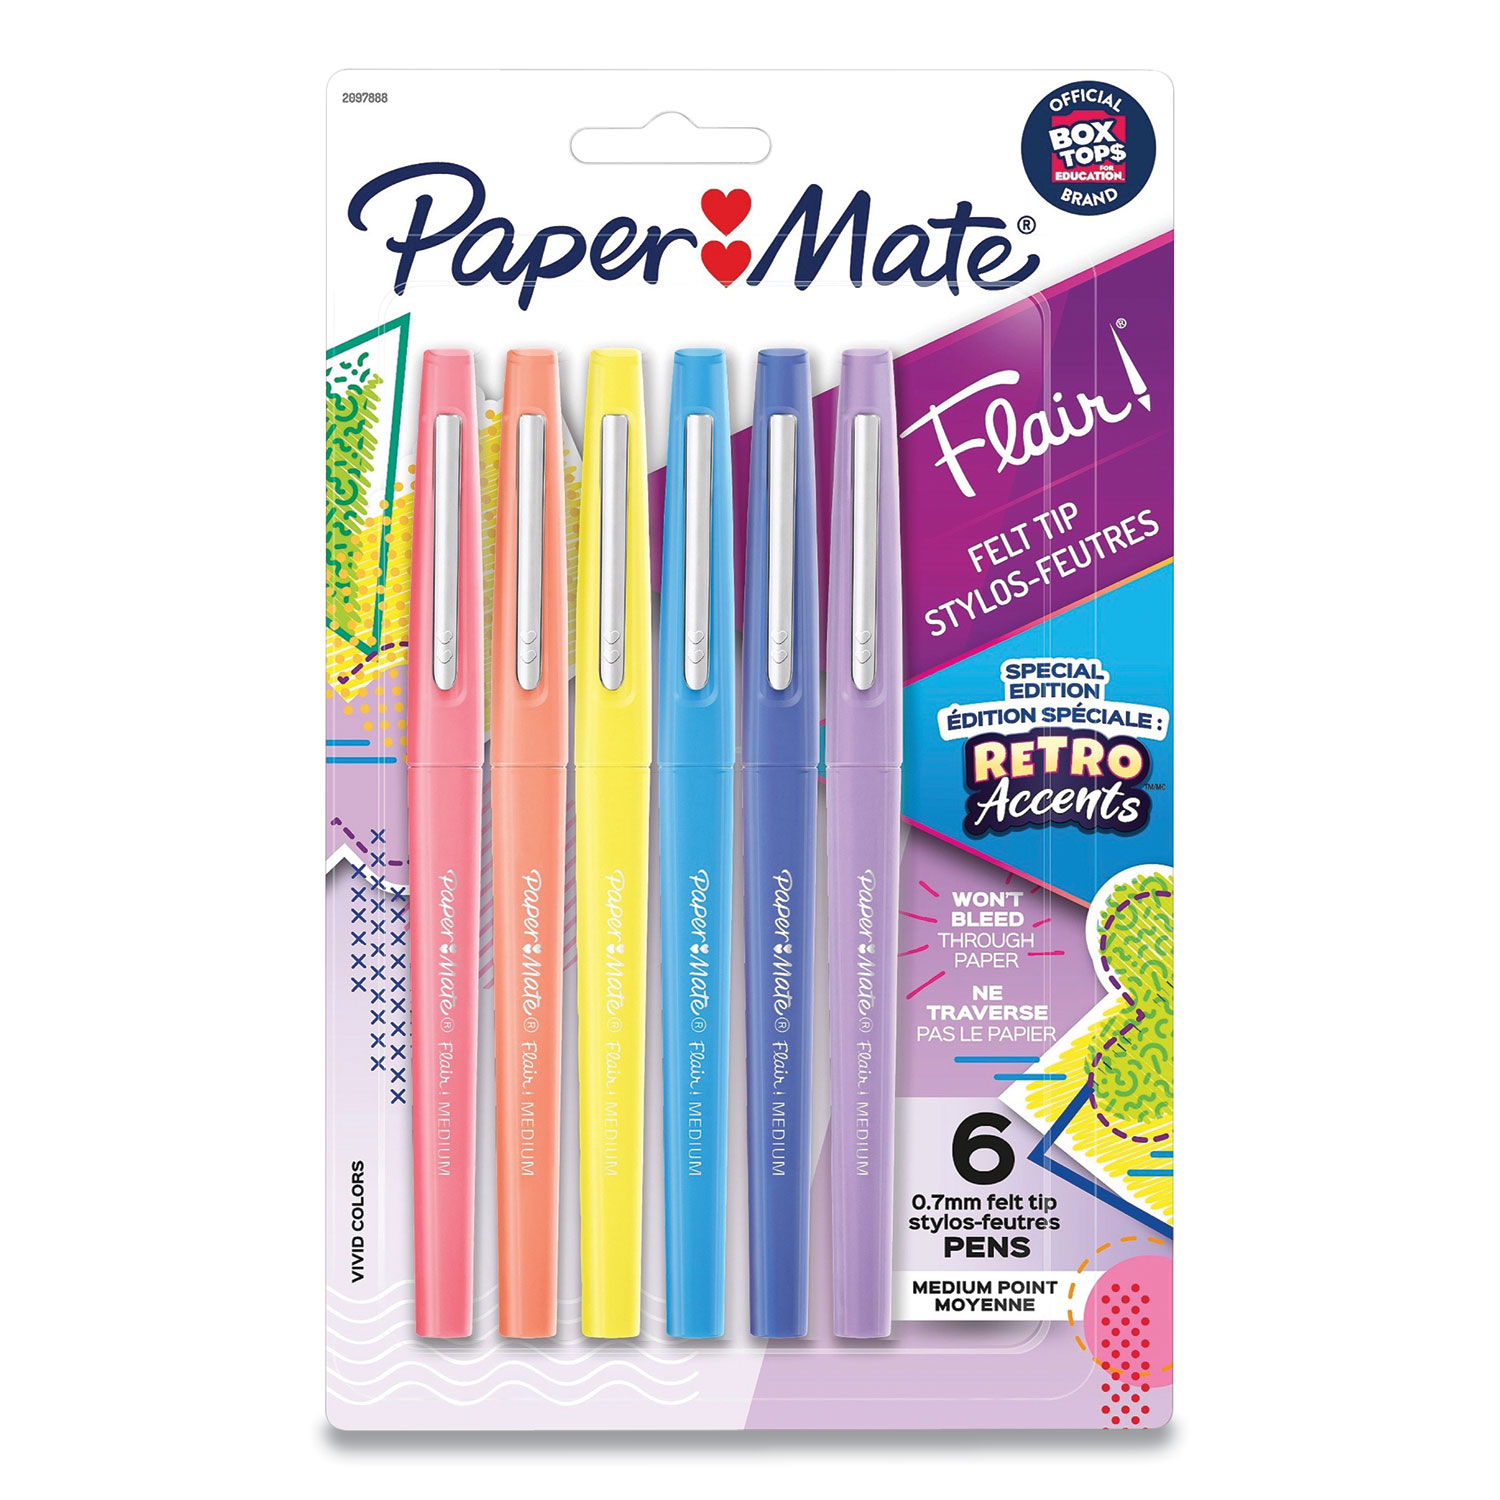  Paper Mate 2097888 Flair Felt Tip Stick Porous Point Pen with Retro Accents, Medium 0.7 mm, Assorted Color Ink/Barrel, 6/Pack (PAP24431535) 